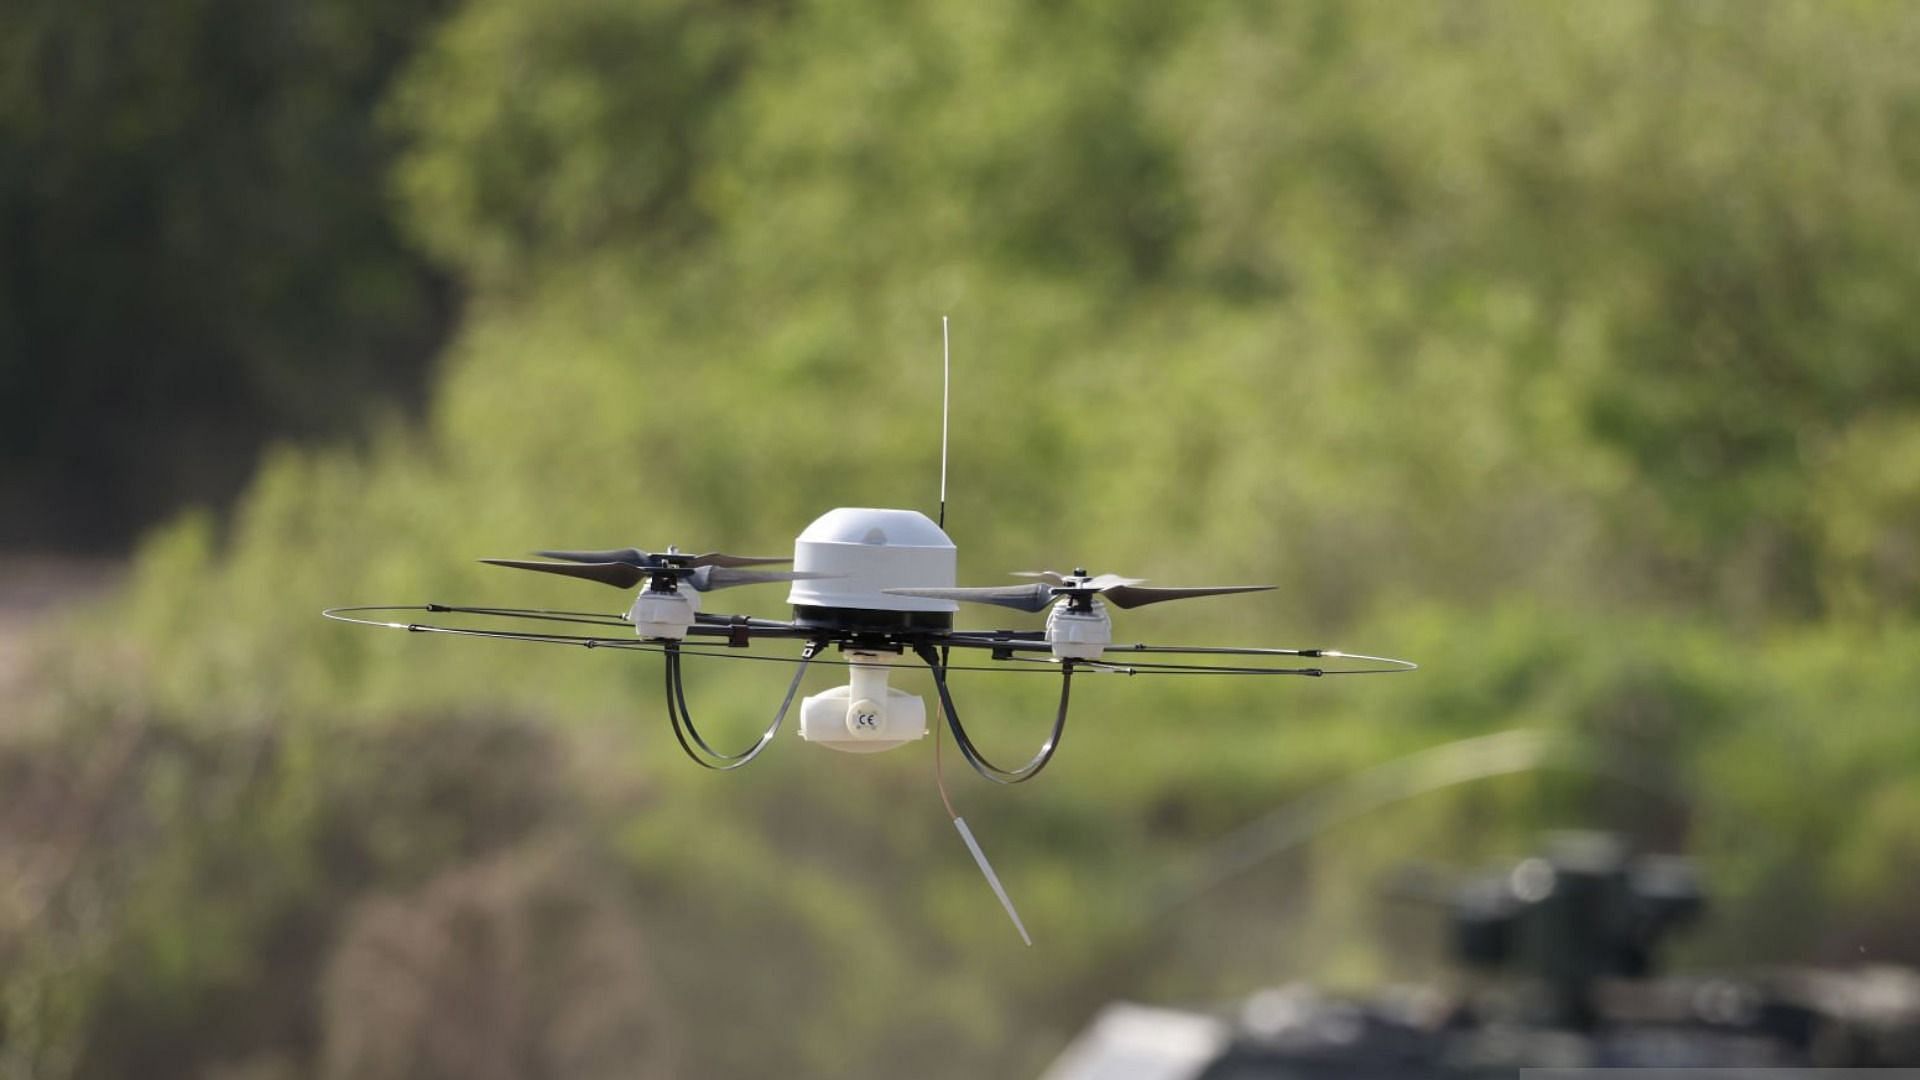 The US has deployed special attacking Ghost drones to Ukraine in its military aid (Image via Sean Gallup/Getty Images)